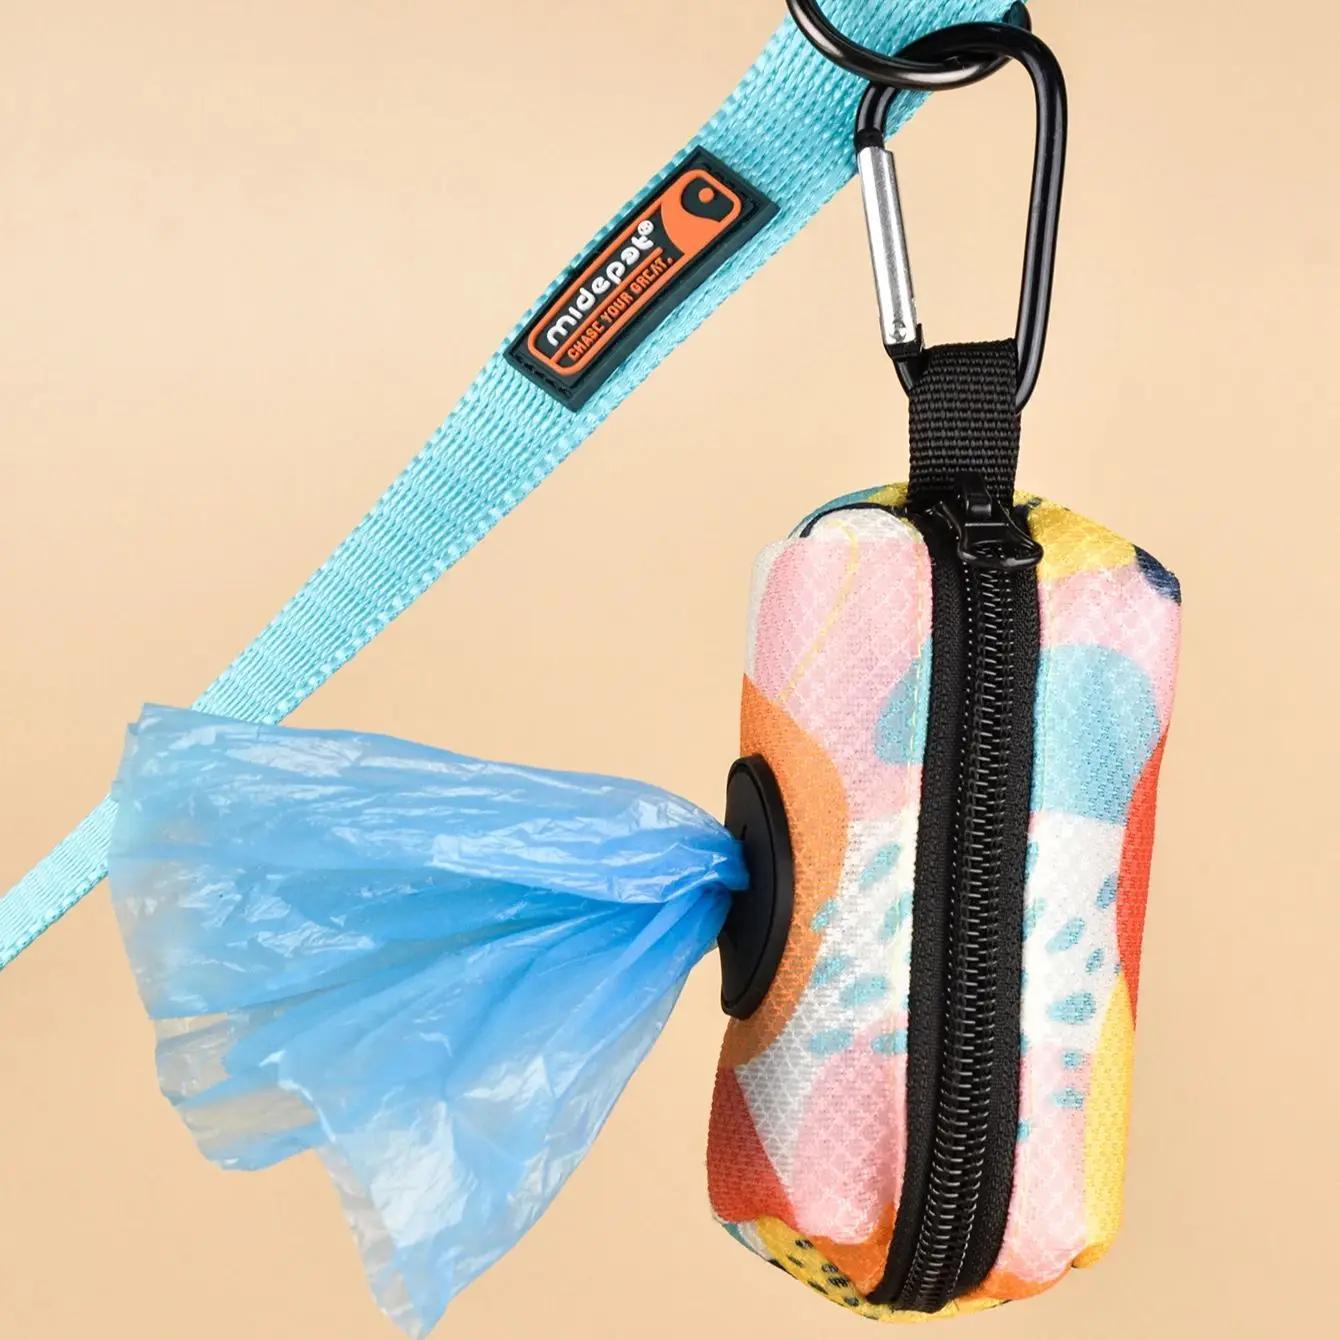 

1pc Assorted Color Print Cute Design Pet Poop Bag Holder Dispenser, Without Poop Bag And Leashes, Can Attached With Any Dog Leashes